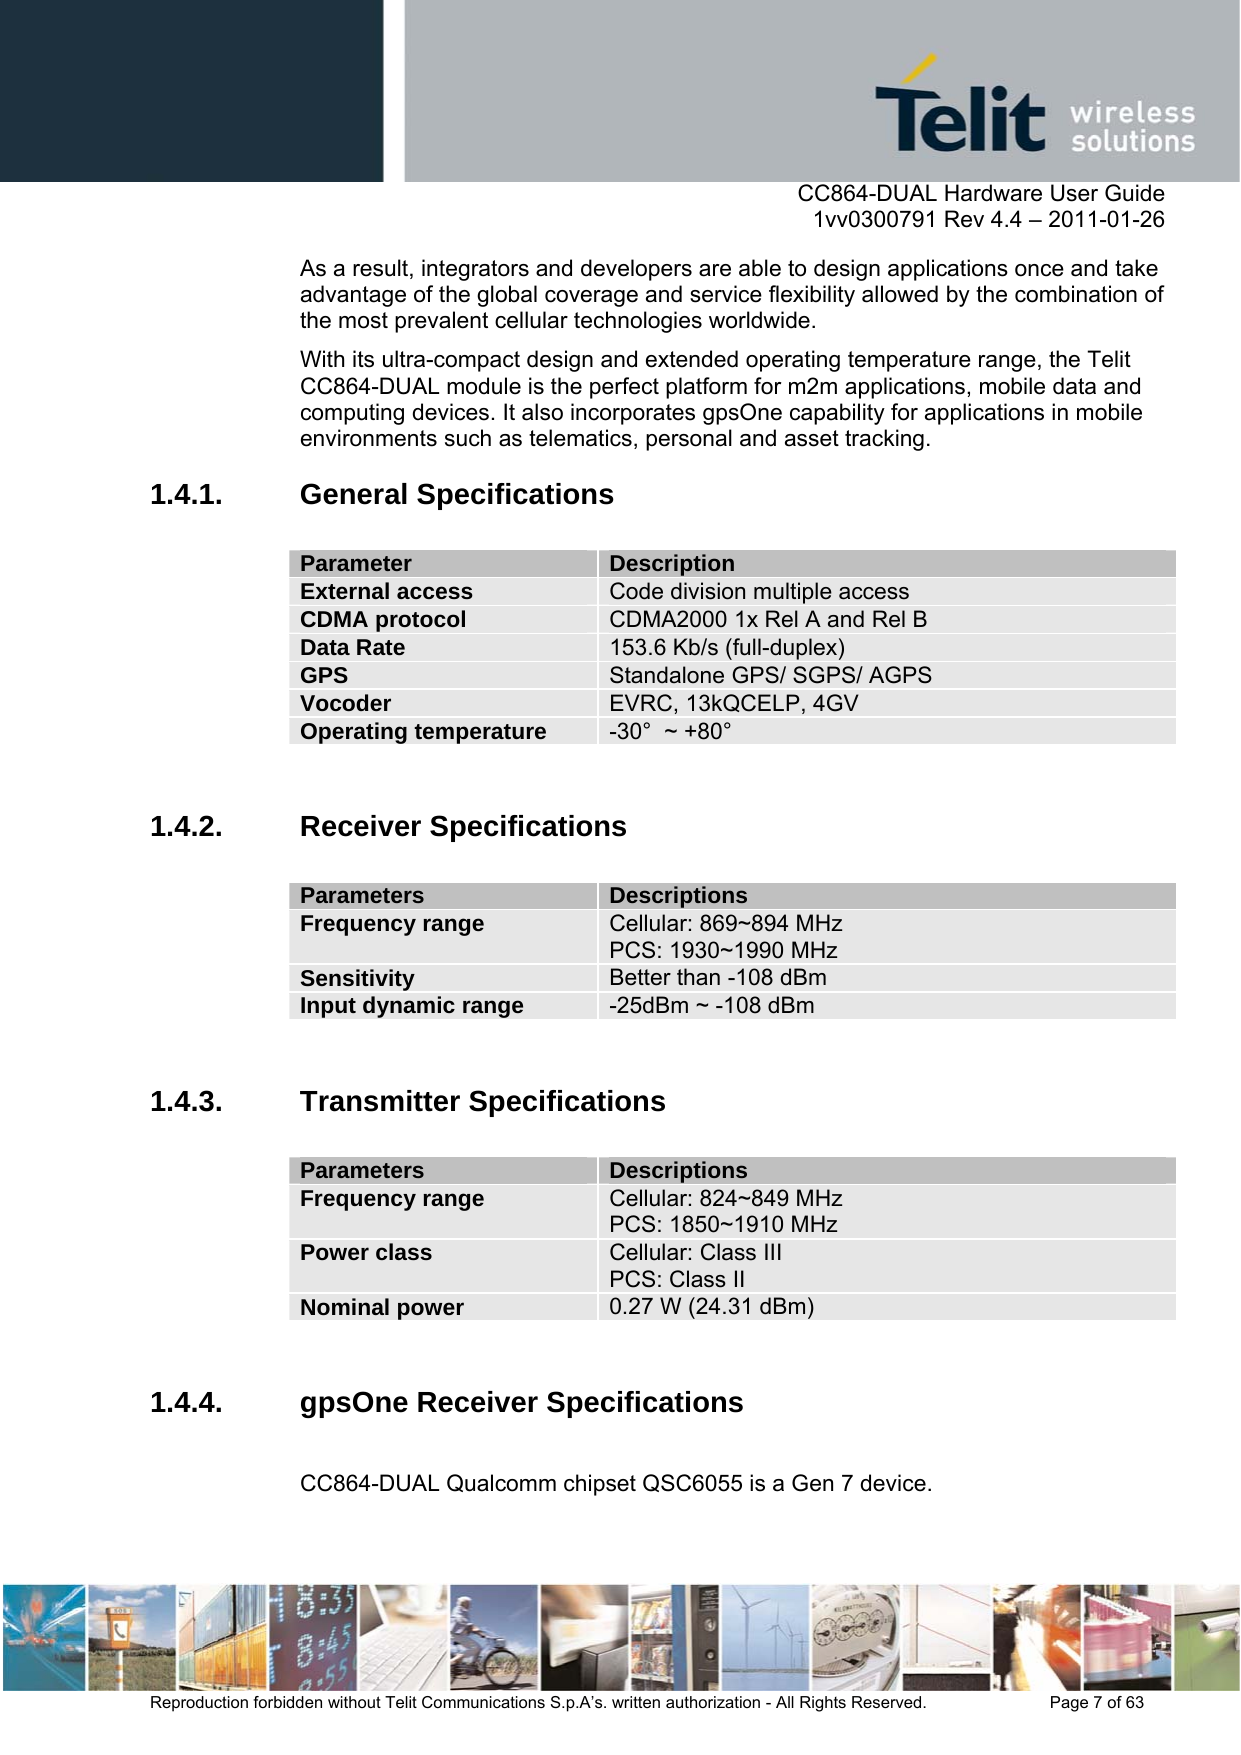      CC864-DUAL Hardware User Guide    1vv0300791 Rev 4.4 – 2011-01-26  Reproduction forbidden without Telit Communications S.p.A’s. written authorization - All Rights Reserved.    Page 7 of 63  As a result, integrators and developers are able to design applications once and take advantage of the global coverage and service flexibility allowed by the combination of the most prevalent cellular technologies worldwide. With its ultra-compact design and extended operating temperature range, the Telit CC864-DUAL module is the perfect platform for m2m applications, mobile data and computing devices. It also incorporates gpsOne capability for applications in mobile environments such as telematics, personal and asset tracking. 1.4.1. General Specifications  Parameter  Description External access  Code division multiple access CDMA protocol  CDMA2000 1x Rel A and Rel B Data Rate  153.6 Kb/s (full-duplex) GPS  Standalone GPS/ SGPS/ AGPS Vocoder  EVRC, 13kQCELP, 4GV Operating temperature  -30°  ~ +80°   1.4.2. Receiver Specifications  Parameters  Descriptions Frequency range  Cellular: 869~894 MHz PCS: 1930~1990 MHz  Sensitivity  Better than -108 dBm Input dynamic range  -25dBm ~ -108 dBm  1.4.3. Transmitter Specifications  Parameters  Descriptions Frequency range  Cellular: 824~849 MHz PCS: 1850~1910 MHz Power class  Cellular: Class III   PCS: Class II Nominal power   0.27 W (24.31 dBm)  1.4.4.  gpsOne Receiver Specifications  CC864-DUAL Qualcomm chipset QSC6055 is a Gen 7 device.  